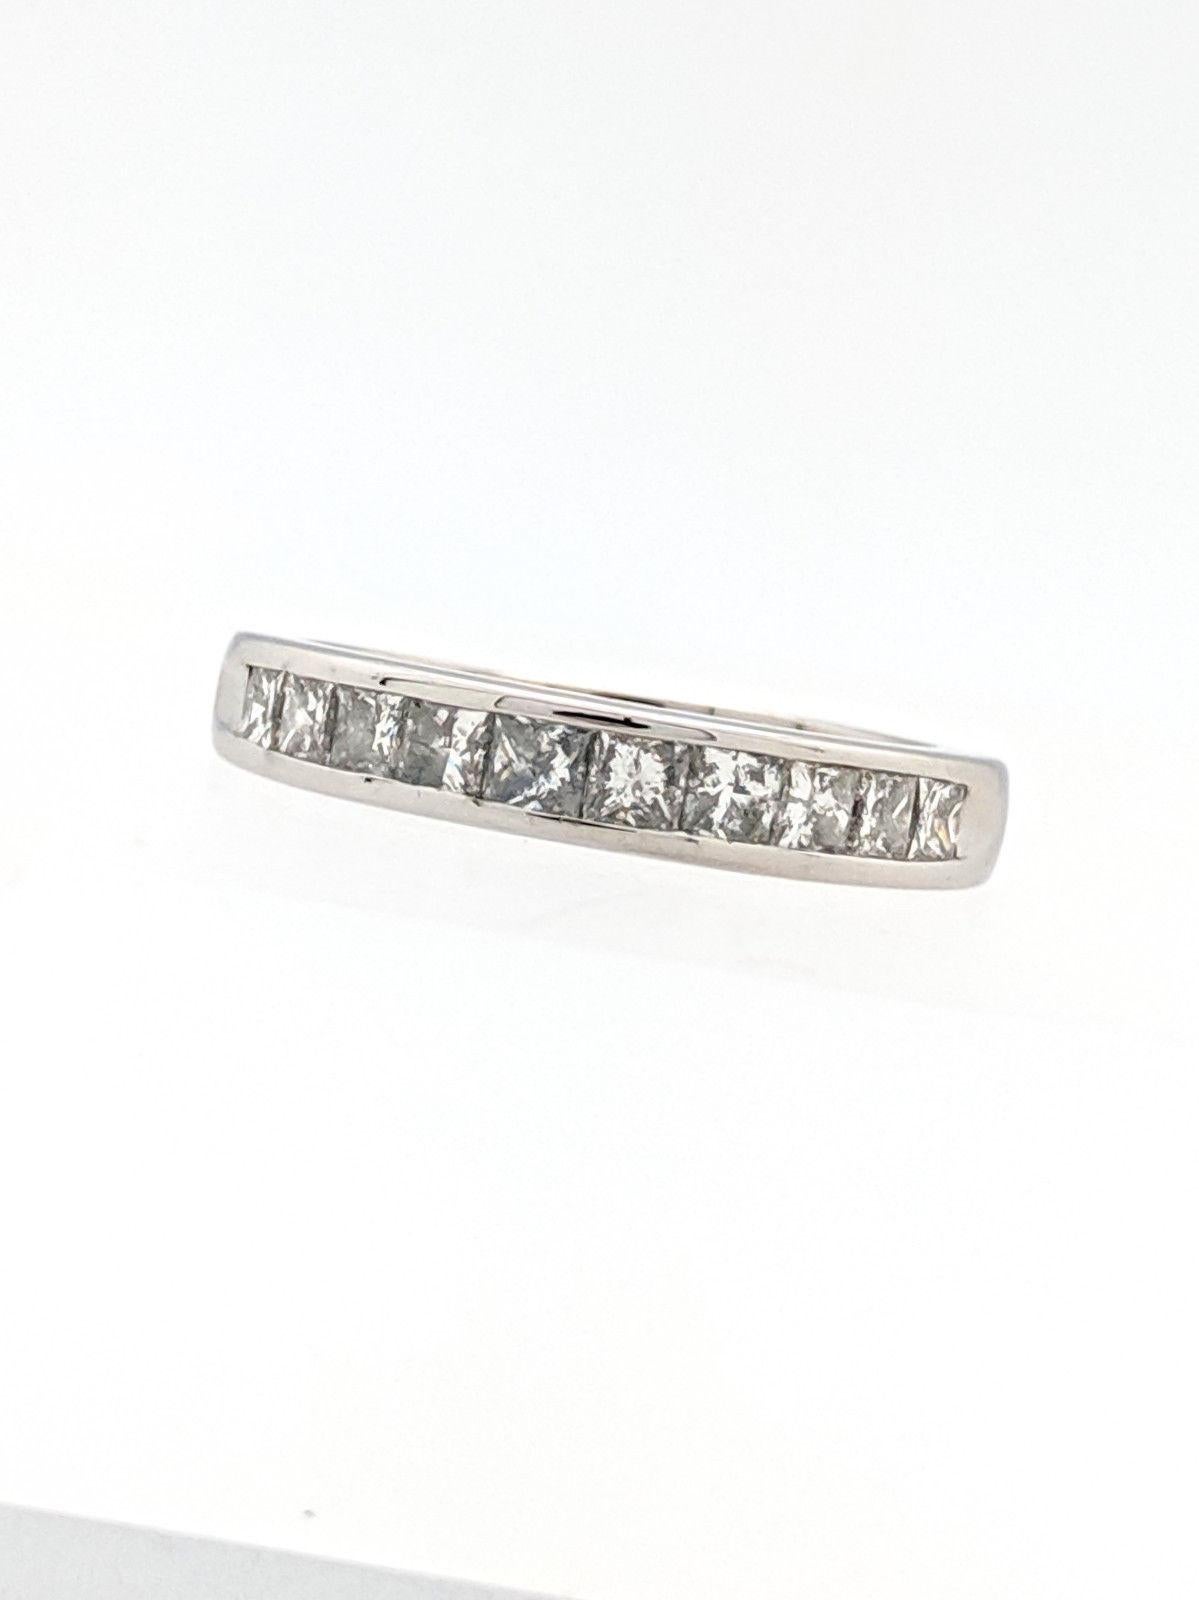 14K White Gold 1ctw Princess Cut Channel Set Diamond Wedding Band Ring

You are viewing a beautiful channel set diamond wedding band. This band is crafted from 14K white gold and weighs 4.5 grams. This ring features (10) natural princess cut